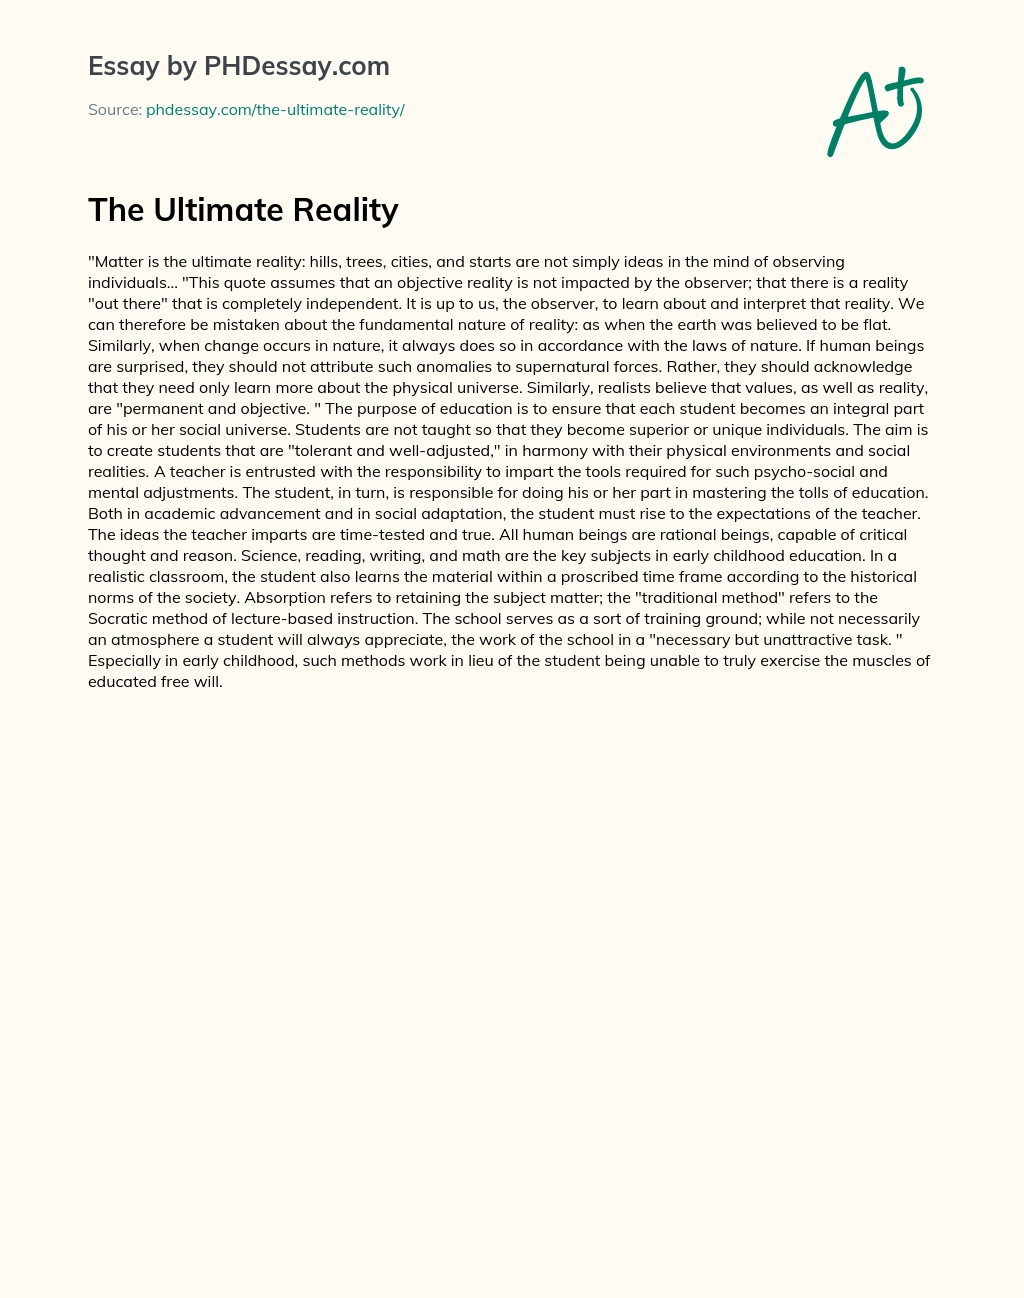 The Ultimate Reality essay